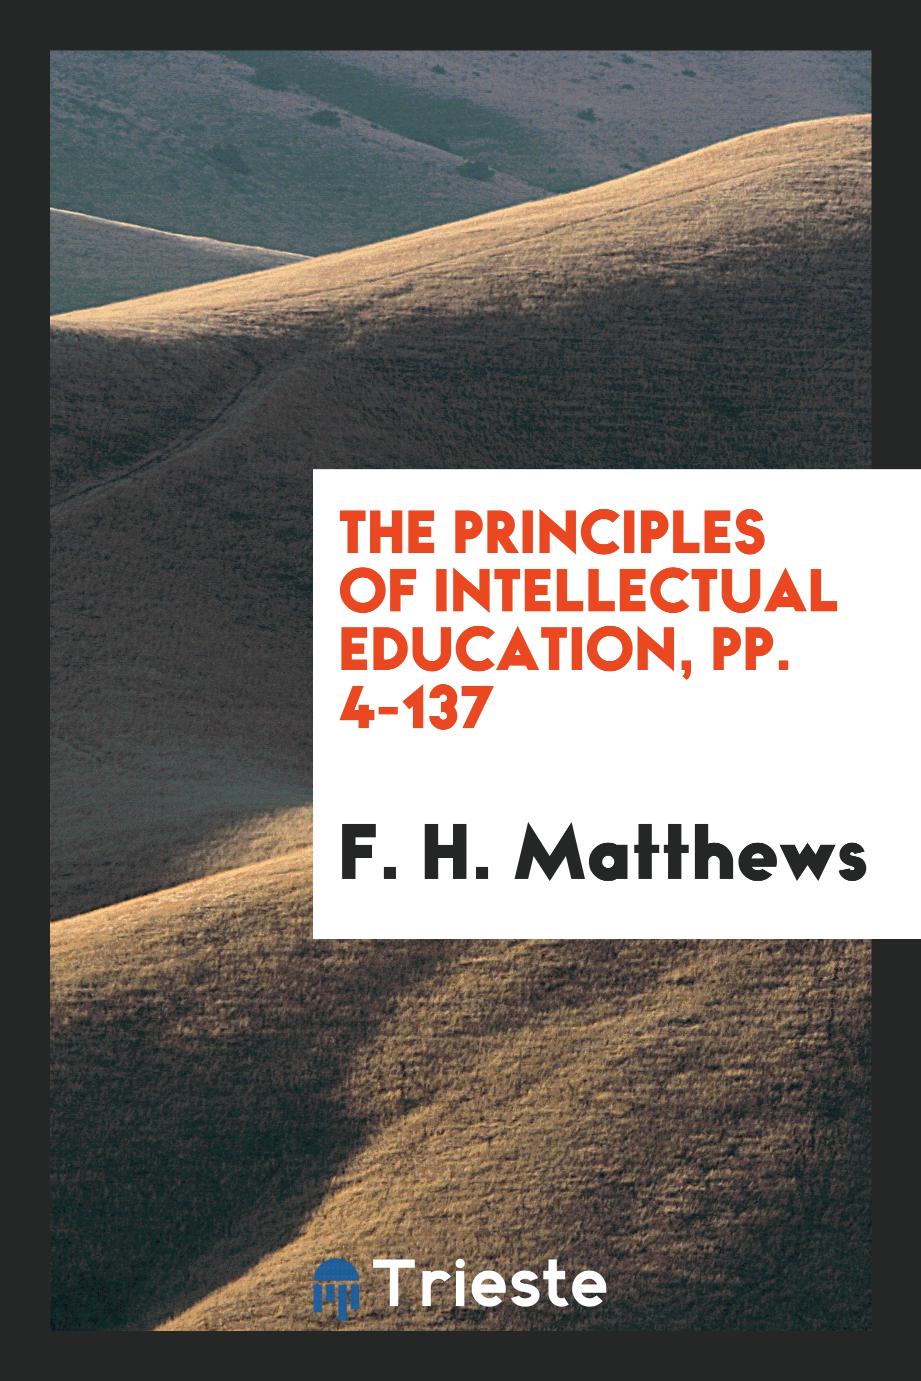 The Principles of Intellectual Education, pp. 4-137